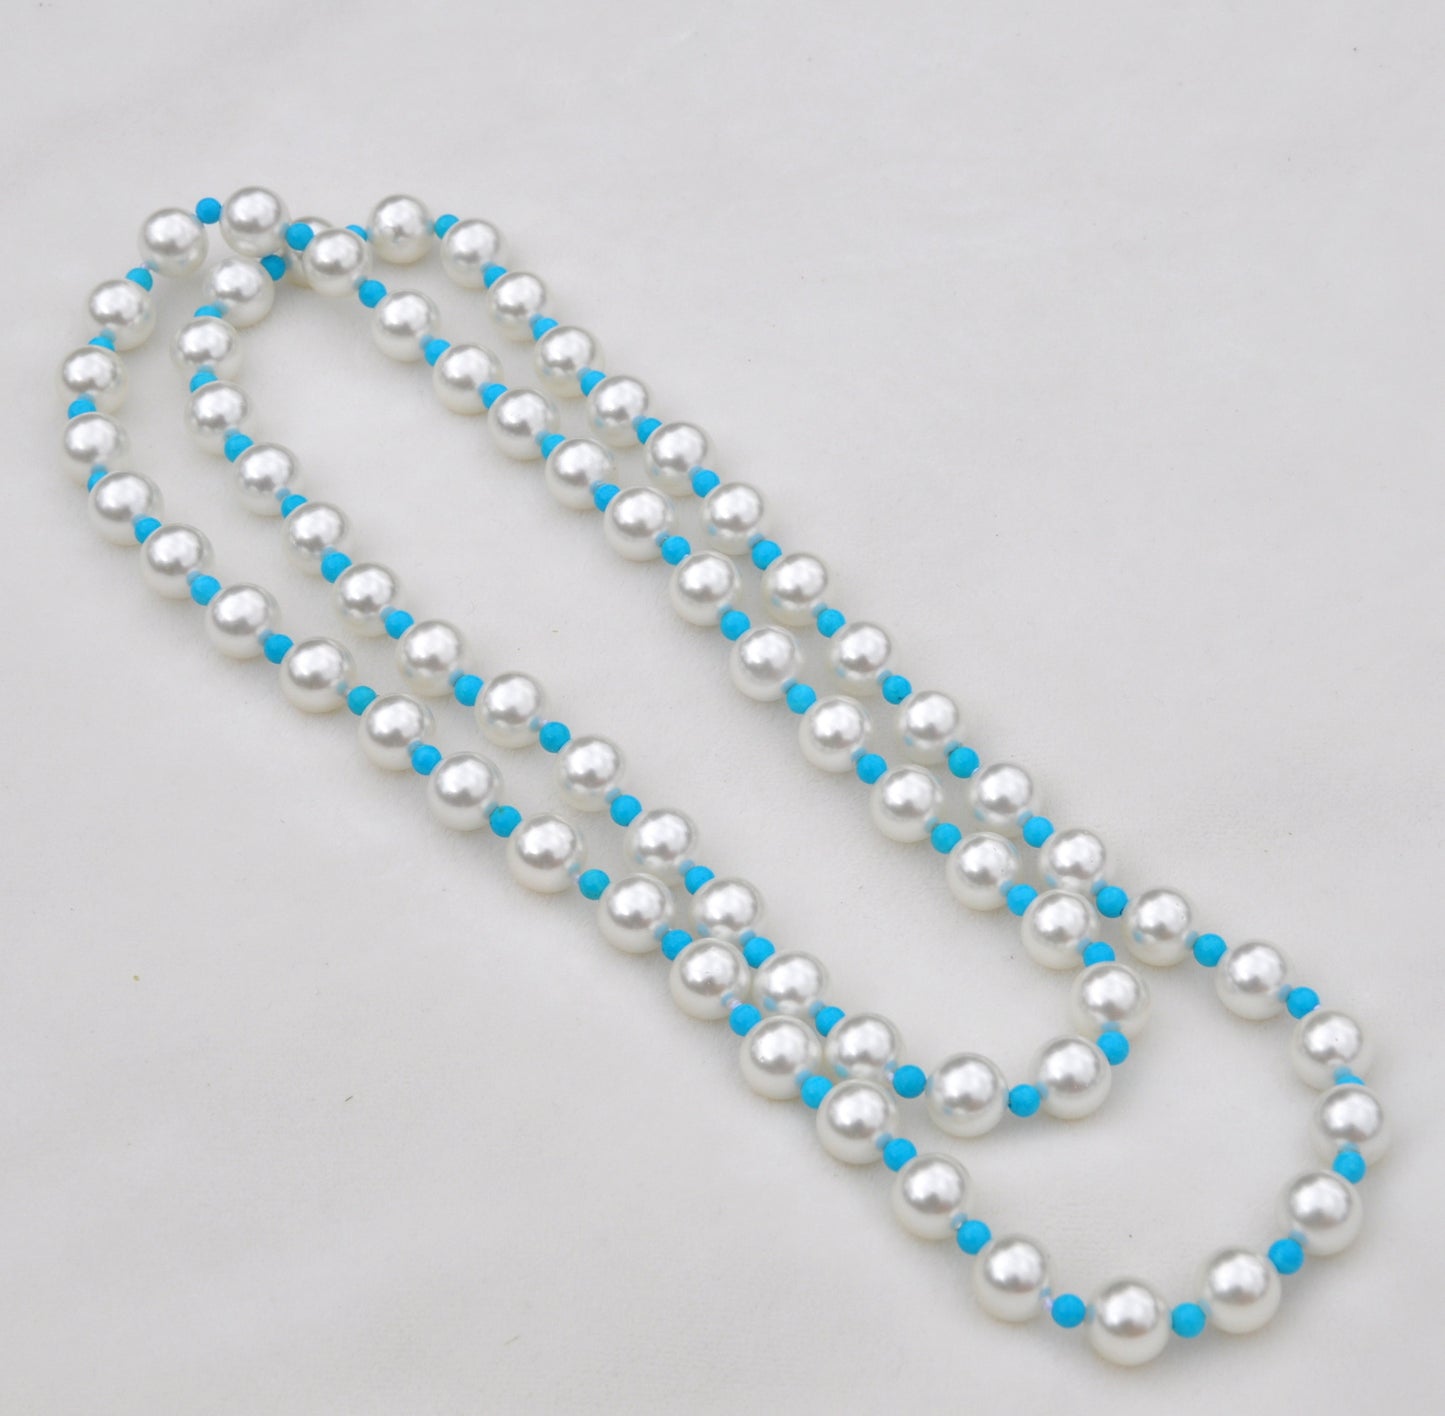 Pearl and Turquoise Necklace